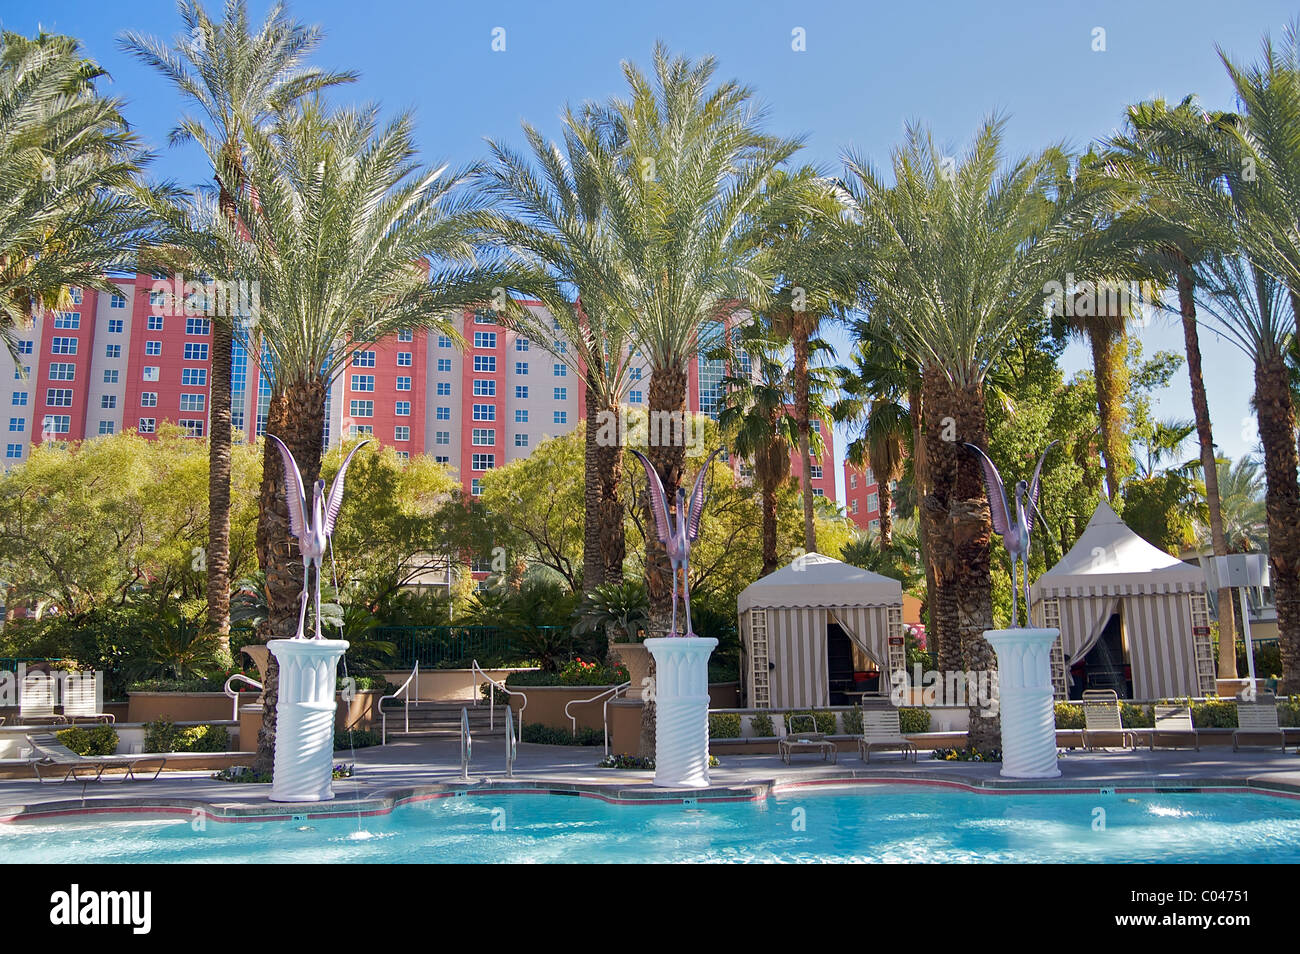 A pool at the Flamingo Las Vegas Hotel and Casino Stock Photo